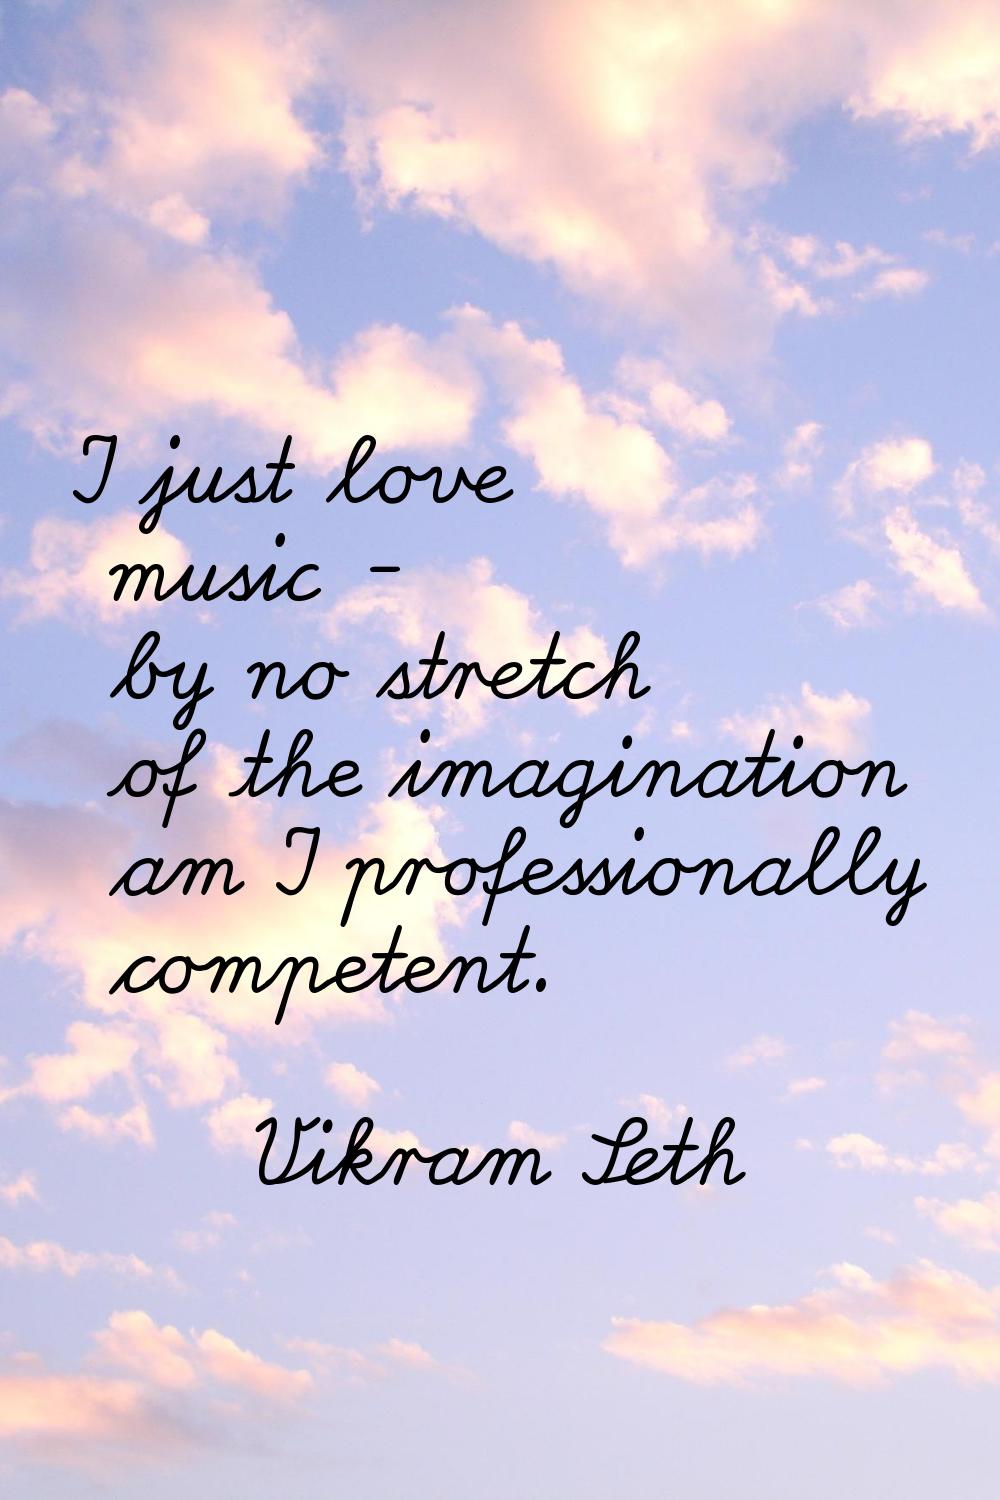 I just love music - by no stretch of the imagination am I professionally competent.